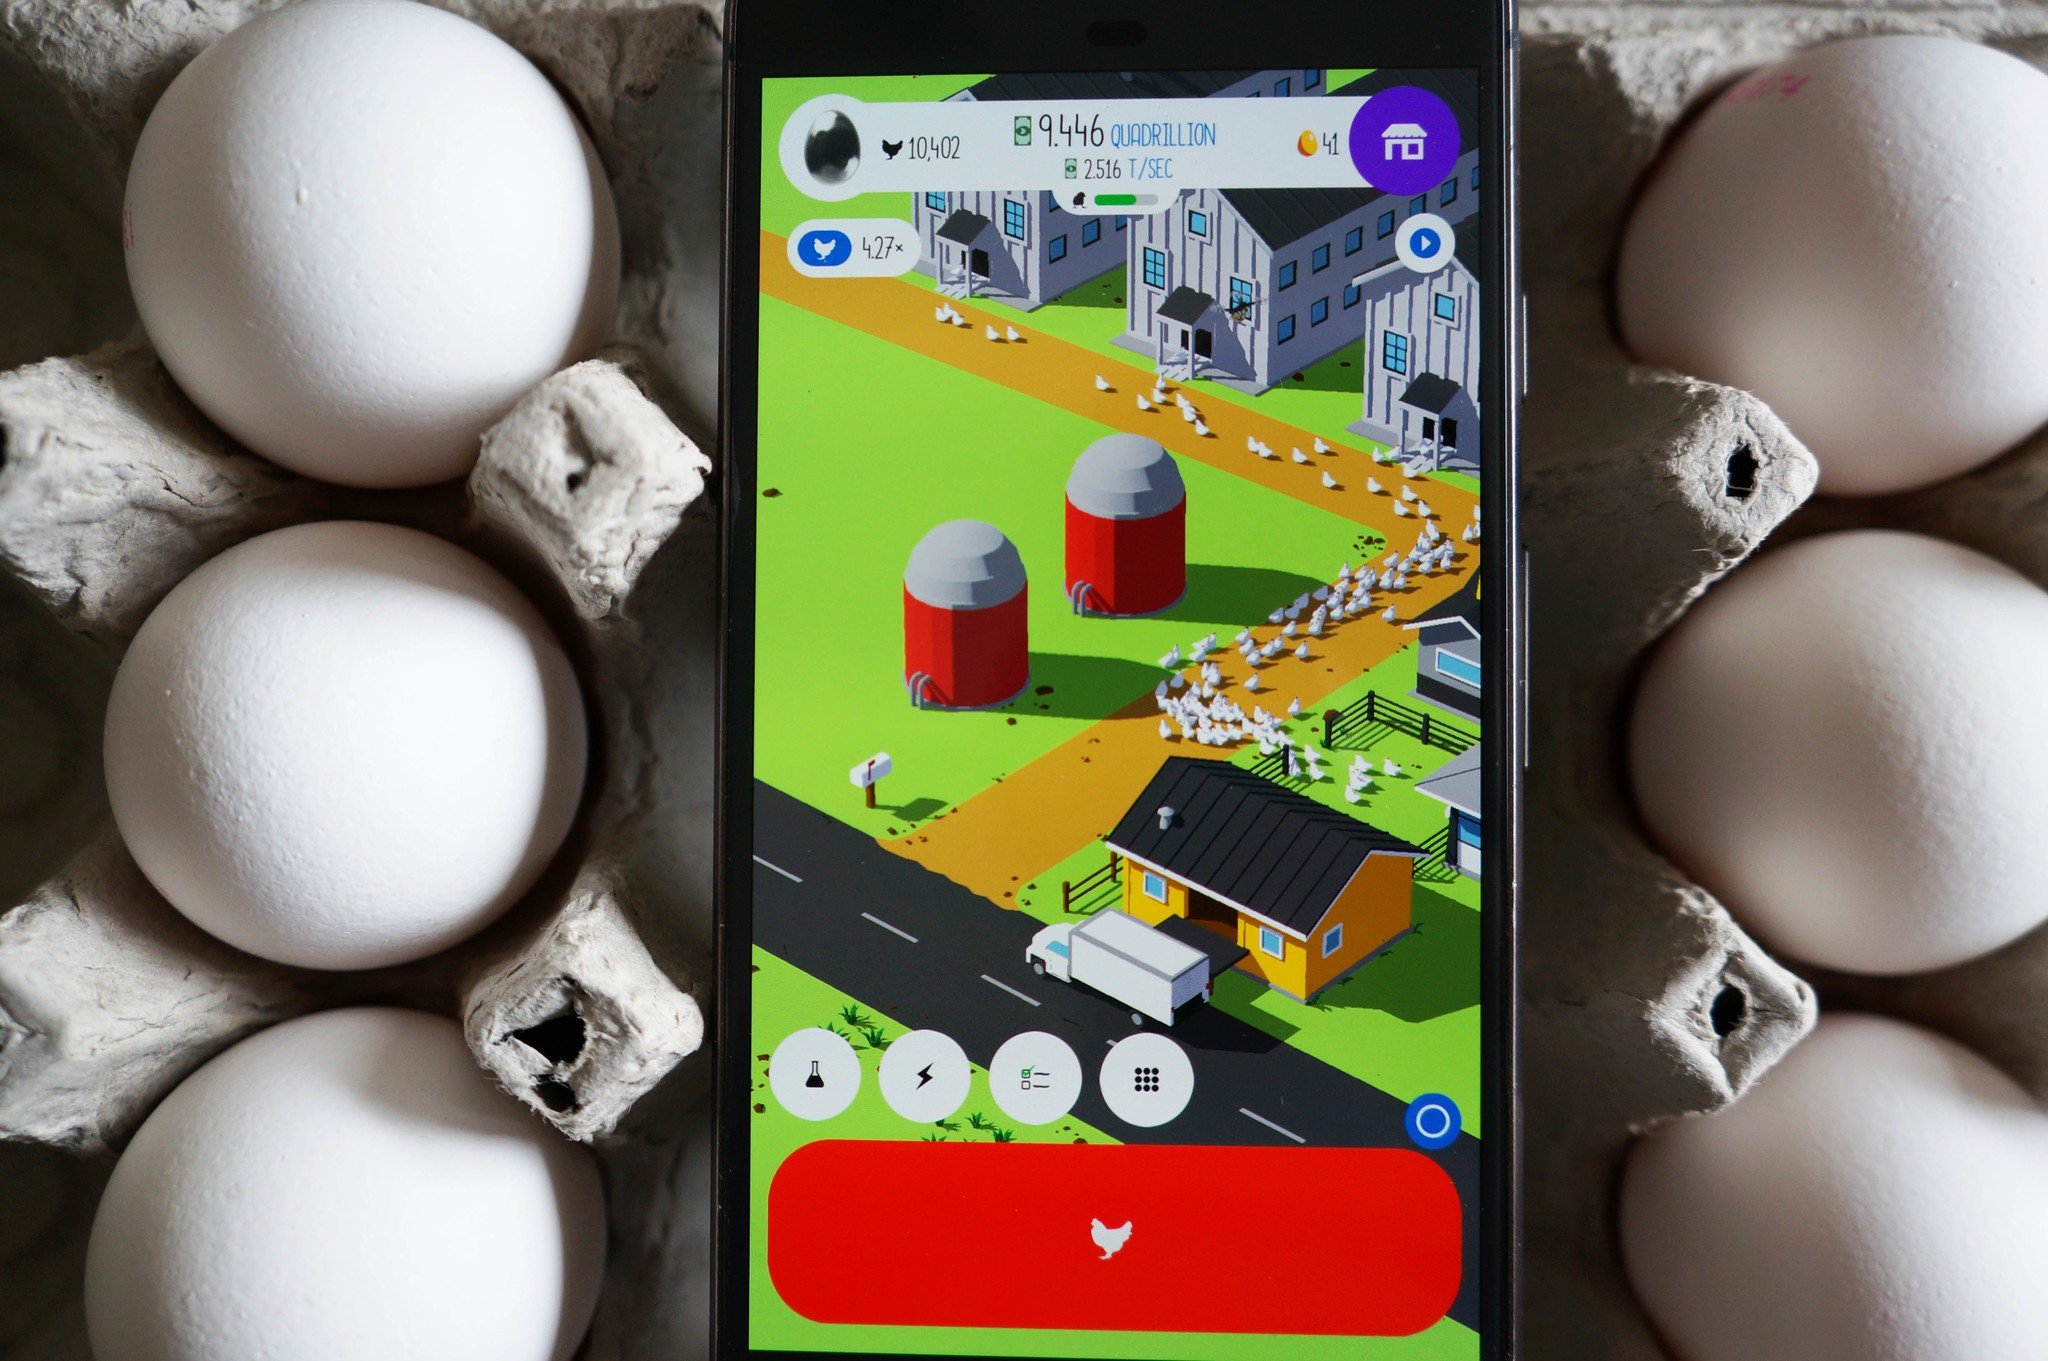 what does hold to research do in egg inc